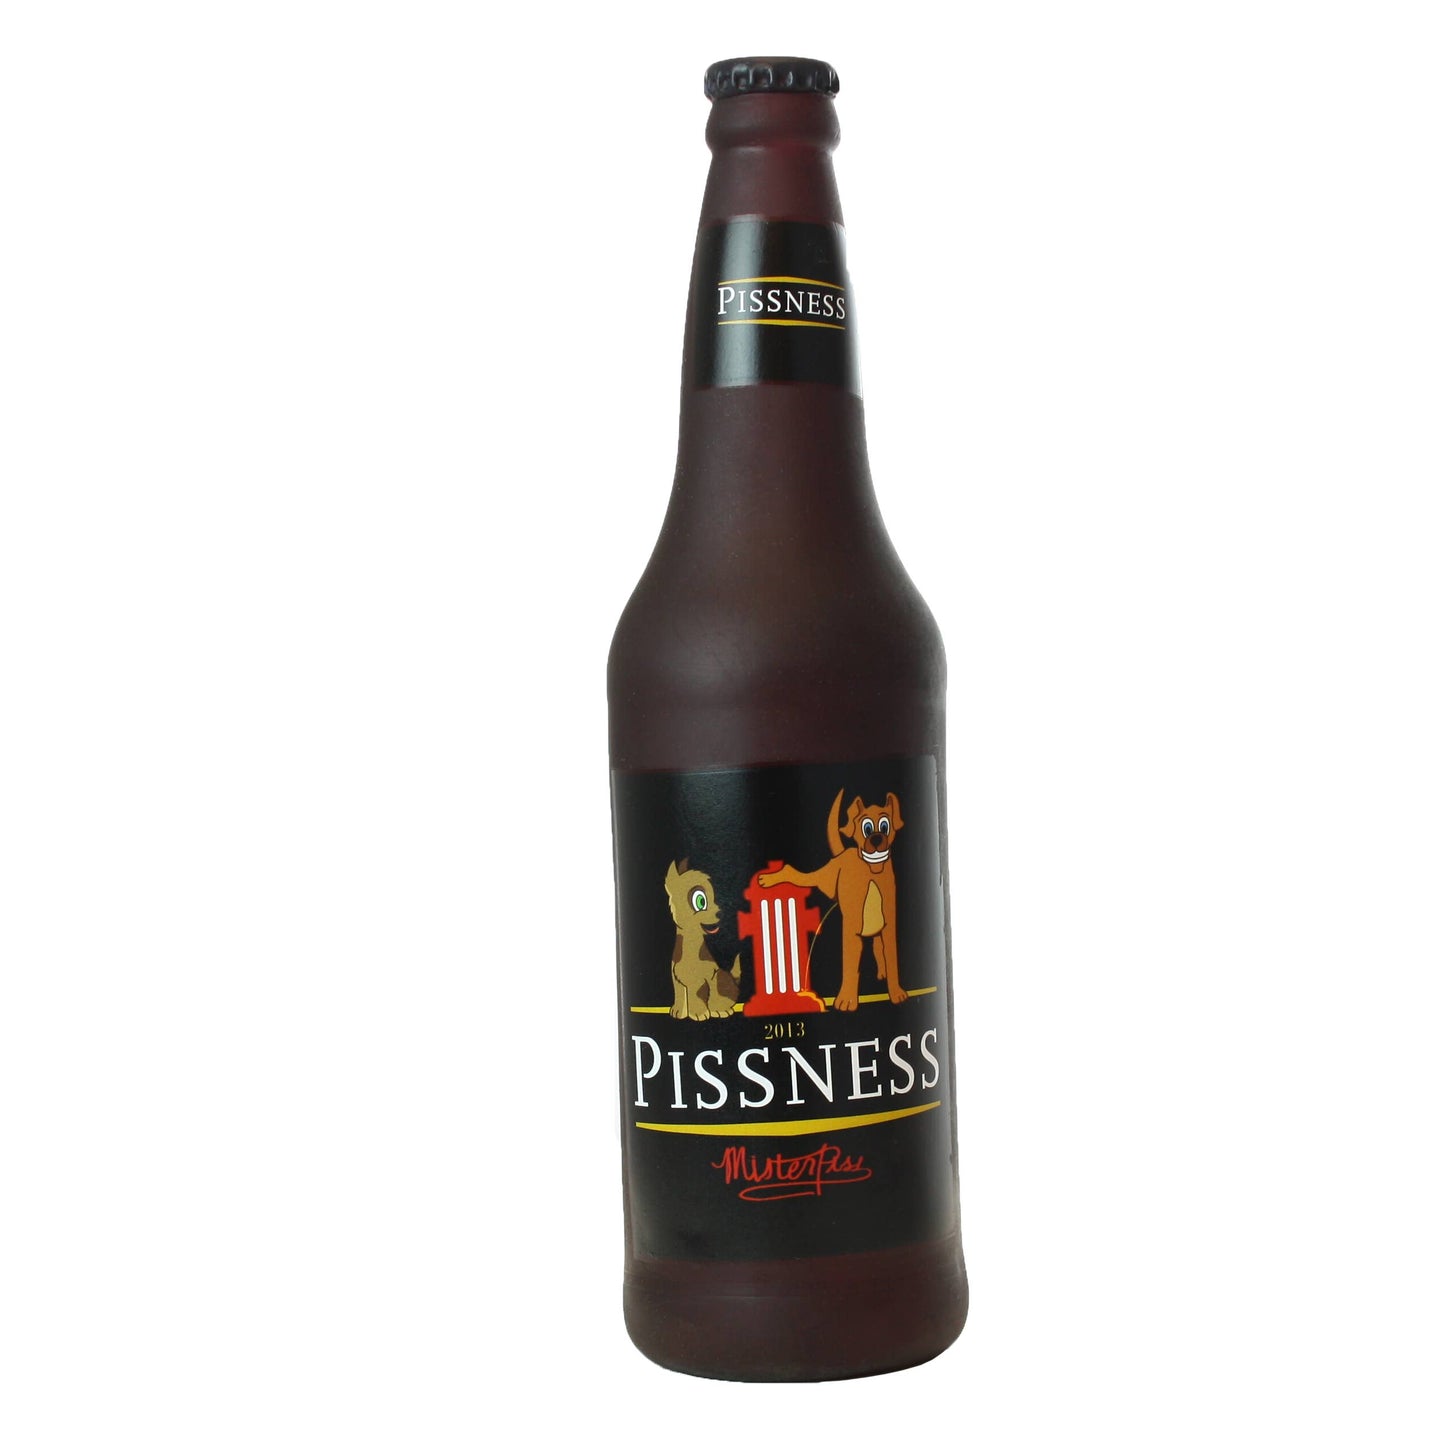 Silly Squeaker Beer Bottle - Pissness